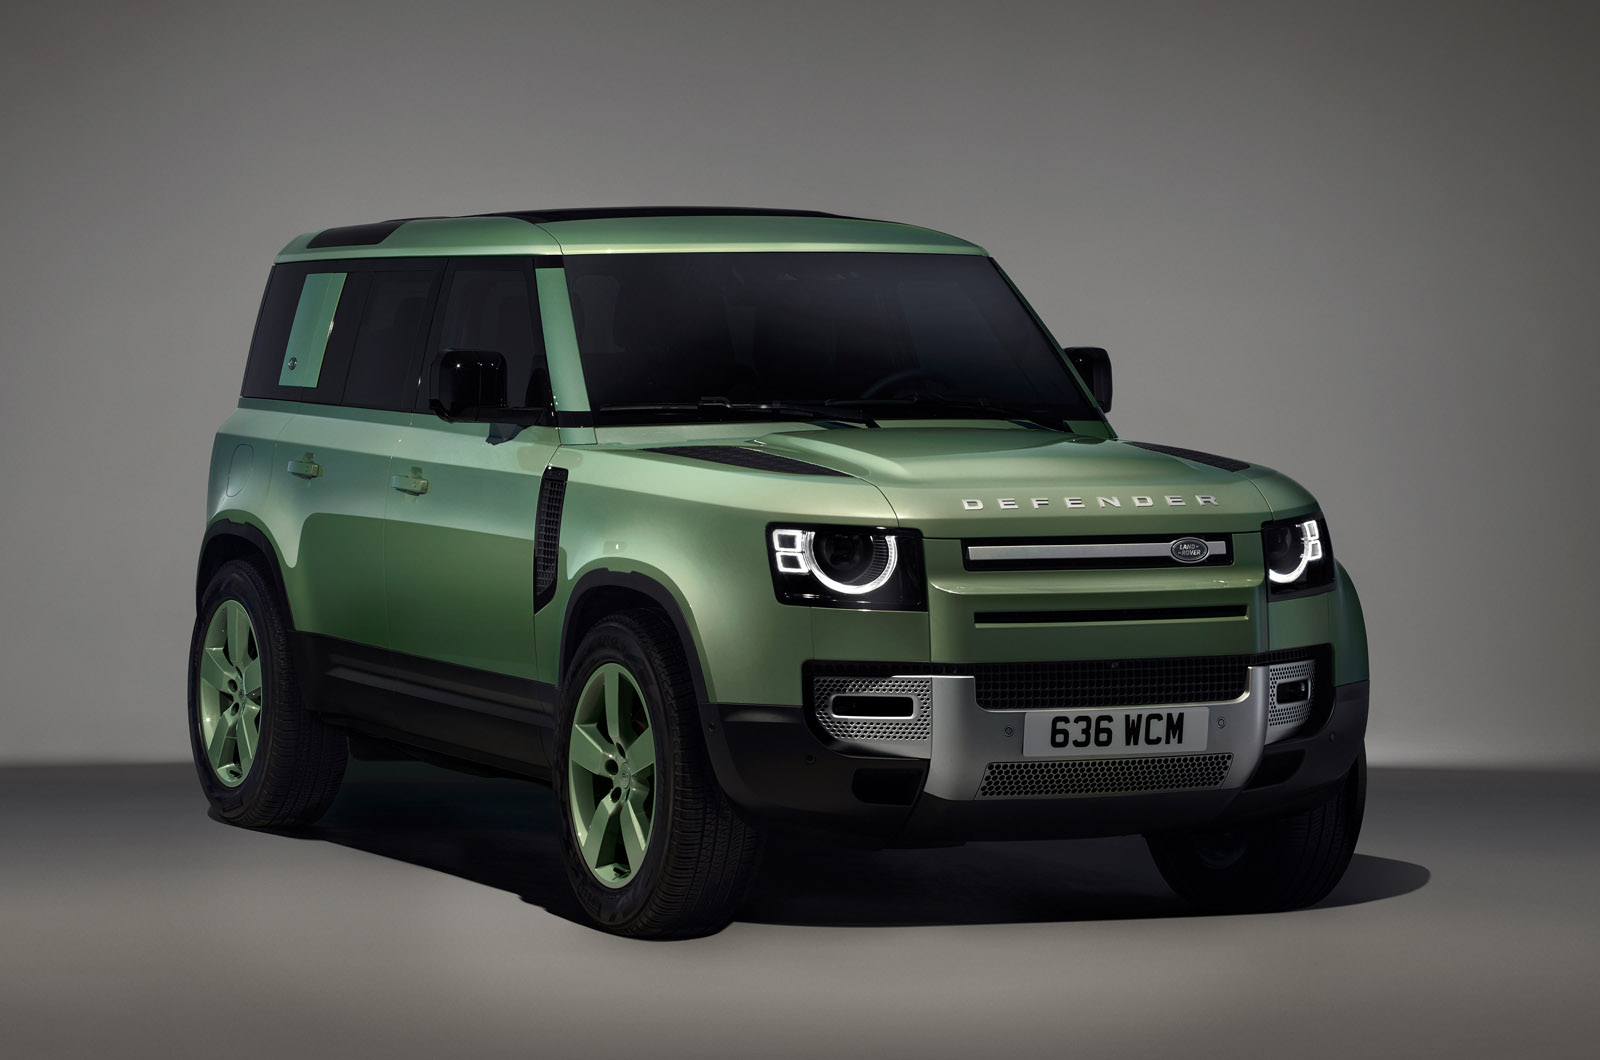 Land Rover marks 75th anniversary with £85,995 Defender